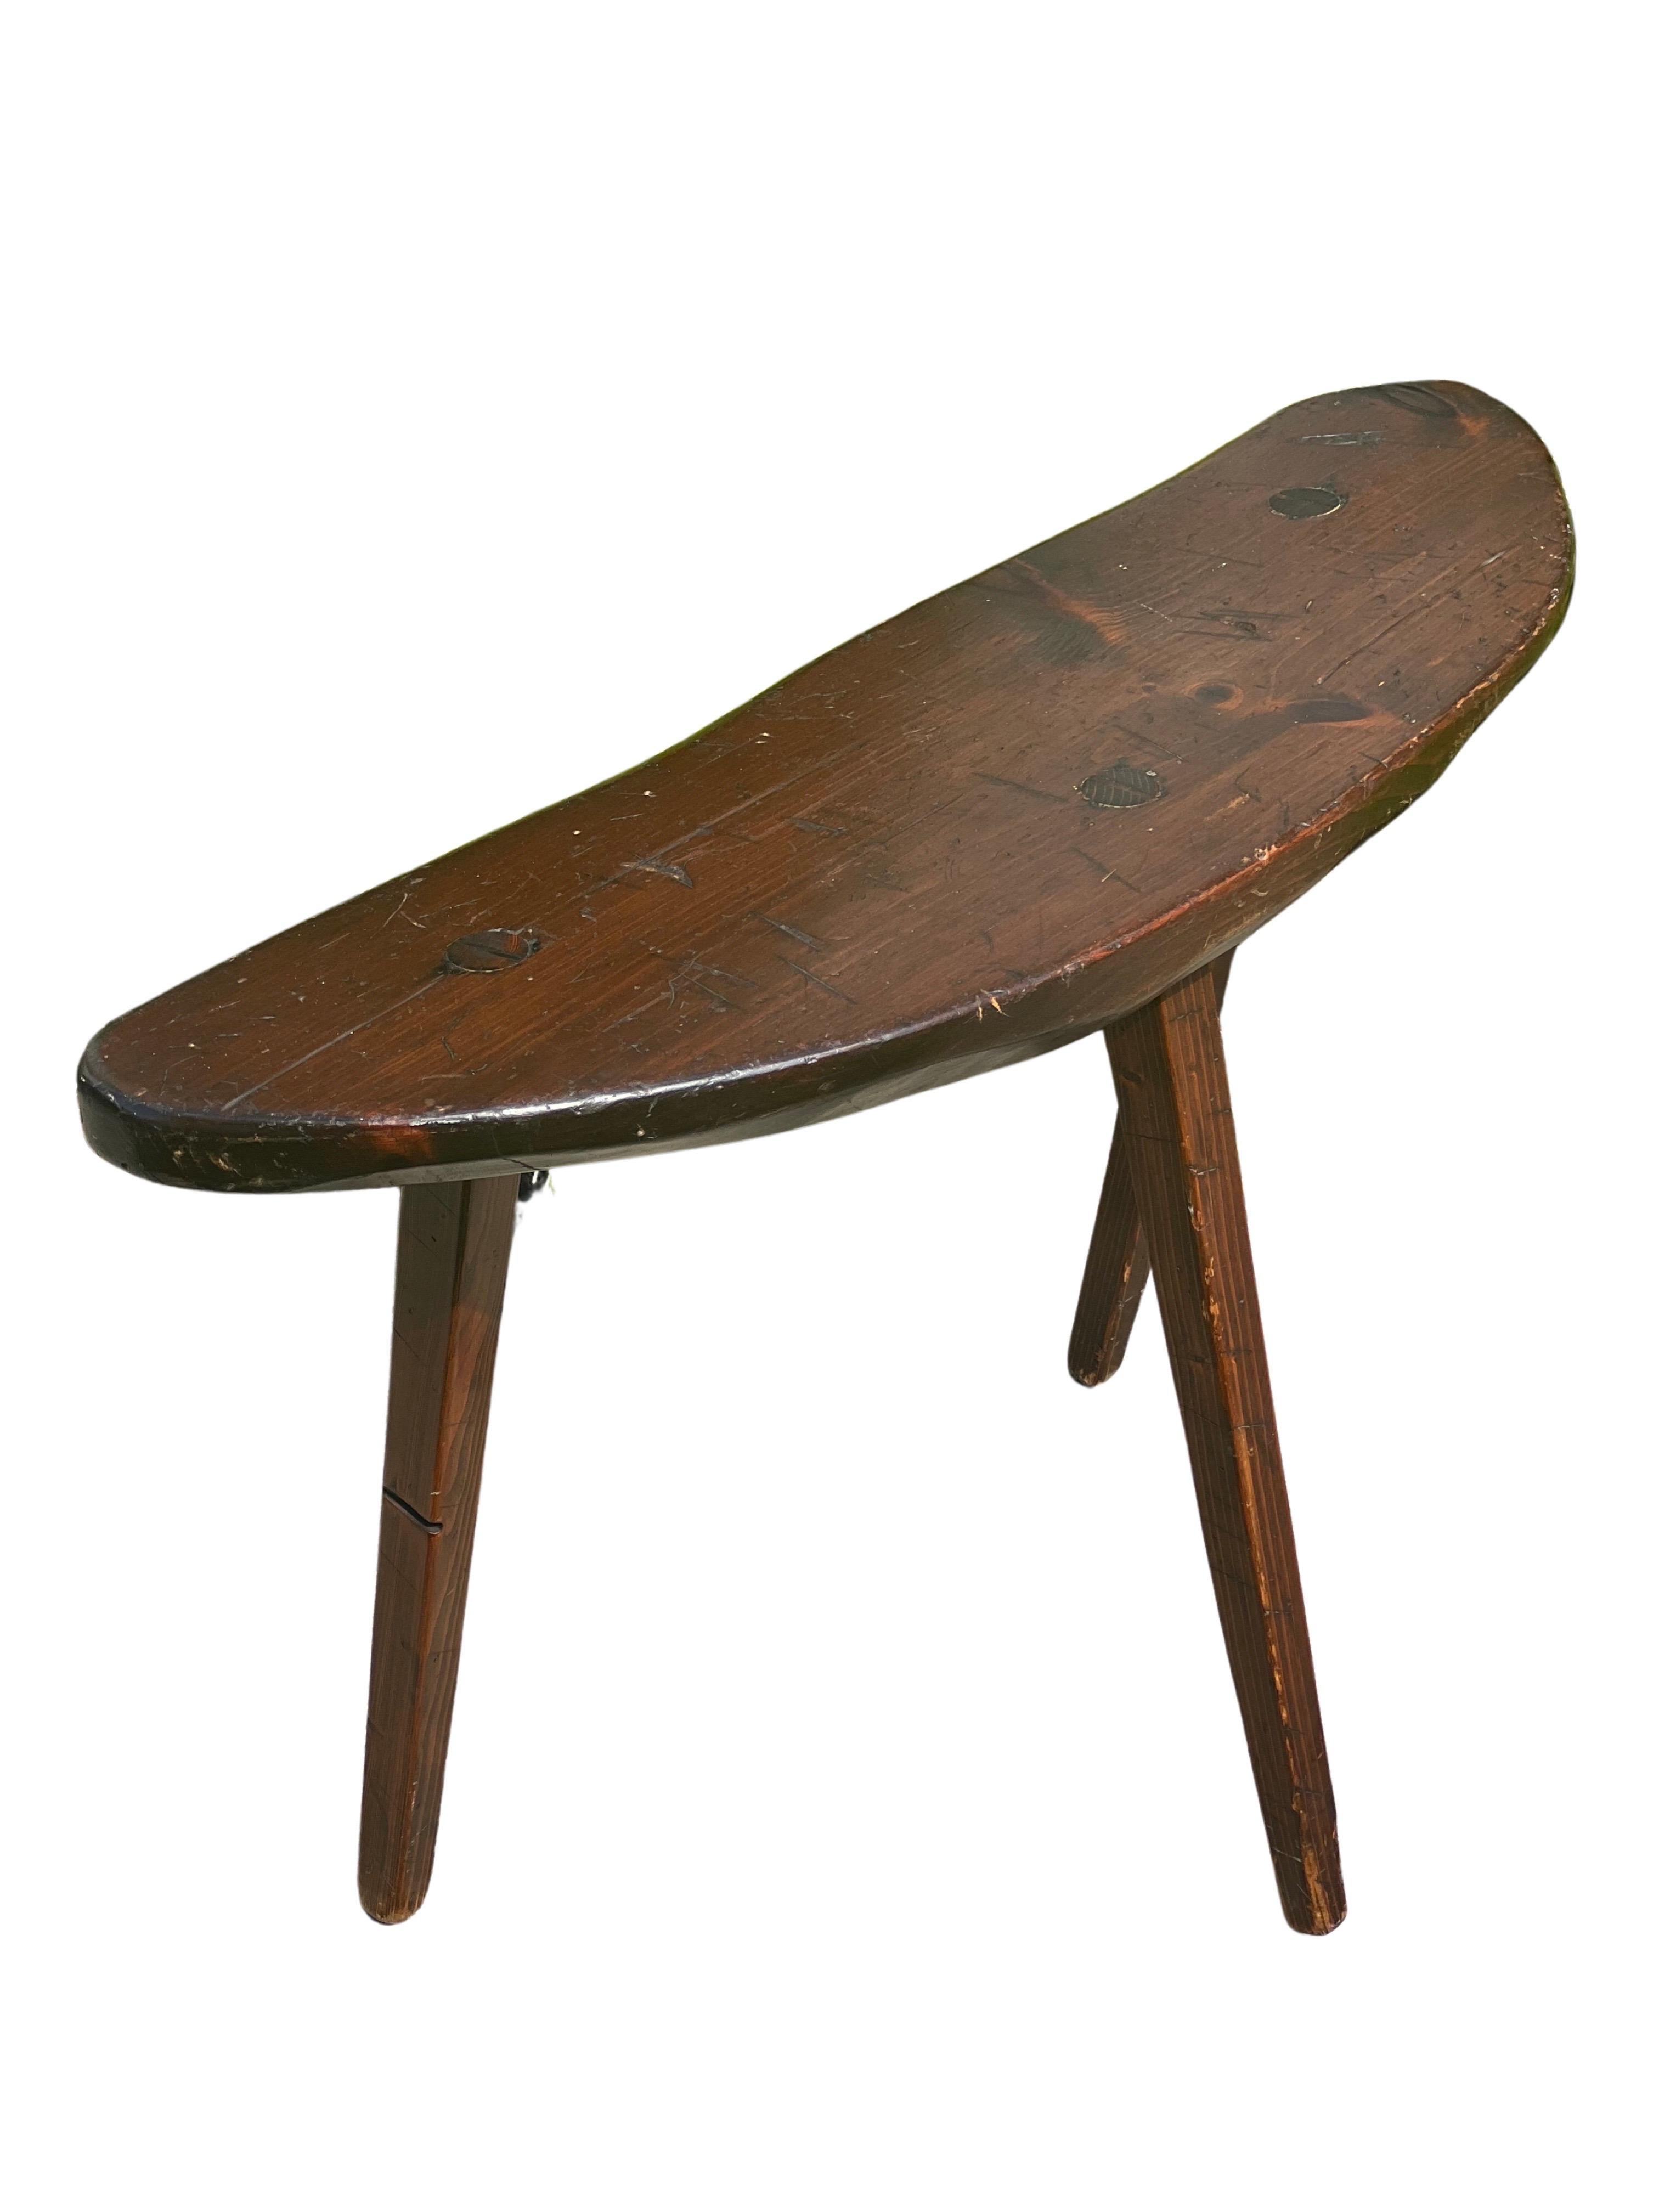 Antique primitive organic from side table on three splayed legs, c. late 19th century. 

One-of-a-kind, handcrafted side table with an organic, crescent-shaped walnut top. Wonderful, uniform patina and live edge detail lend dimension and depth to